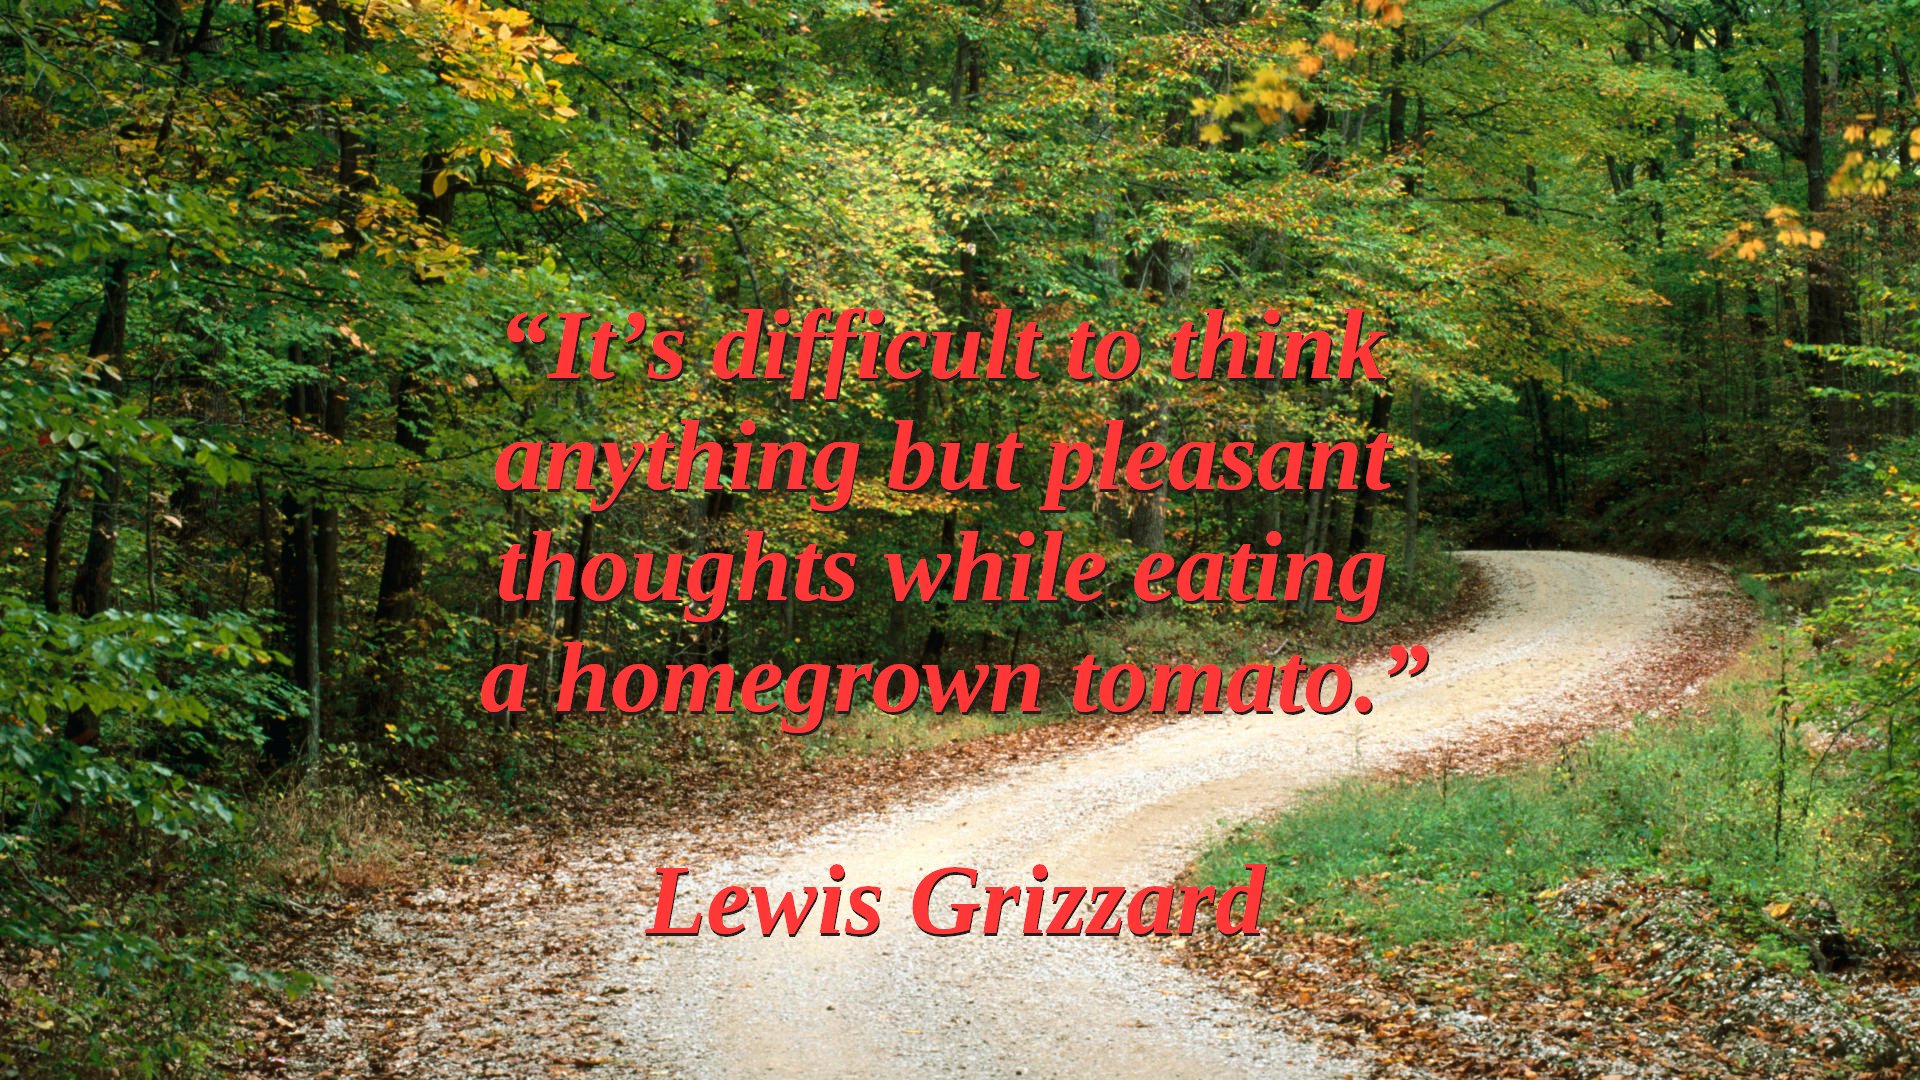 Lewis Grizzard On Tomatoes